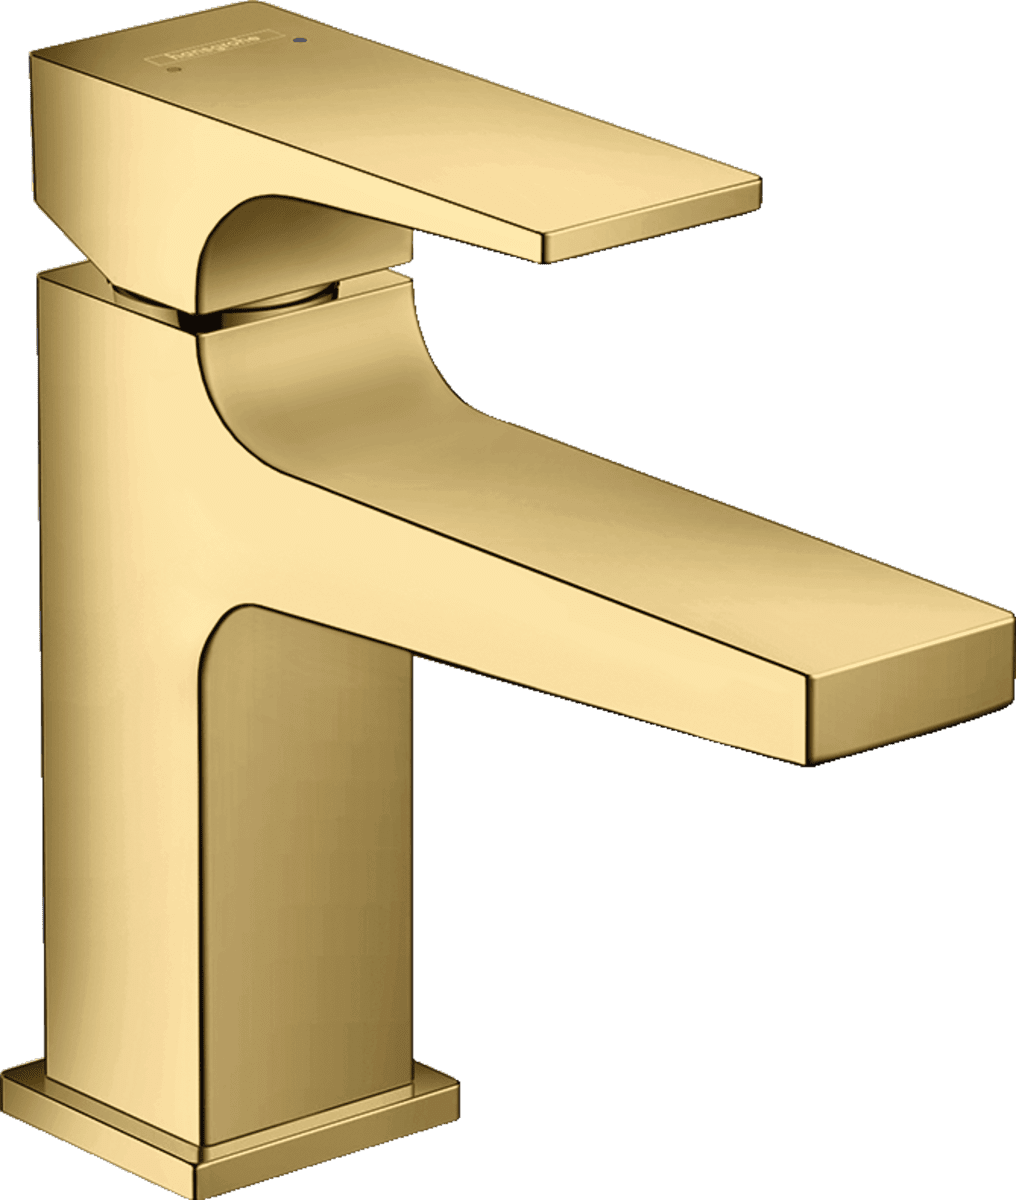 Picture of HANSGROHE Metropol Single lever basin mixer 100 with lever handle for handrinse basins with push-open waste set #32500990 - Polished Gold Optic